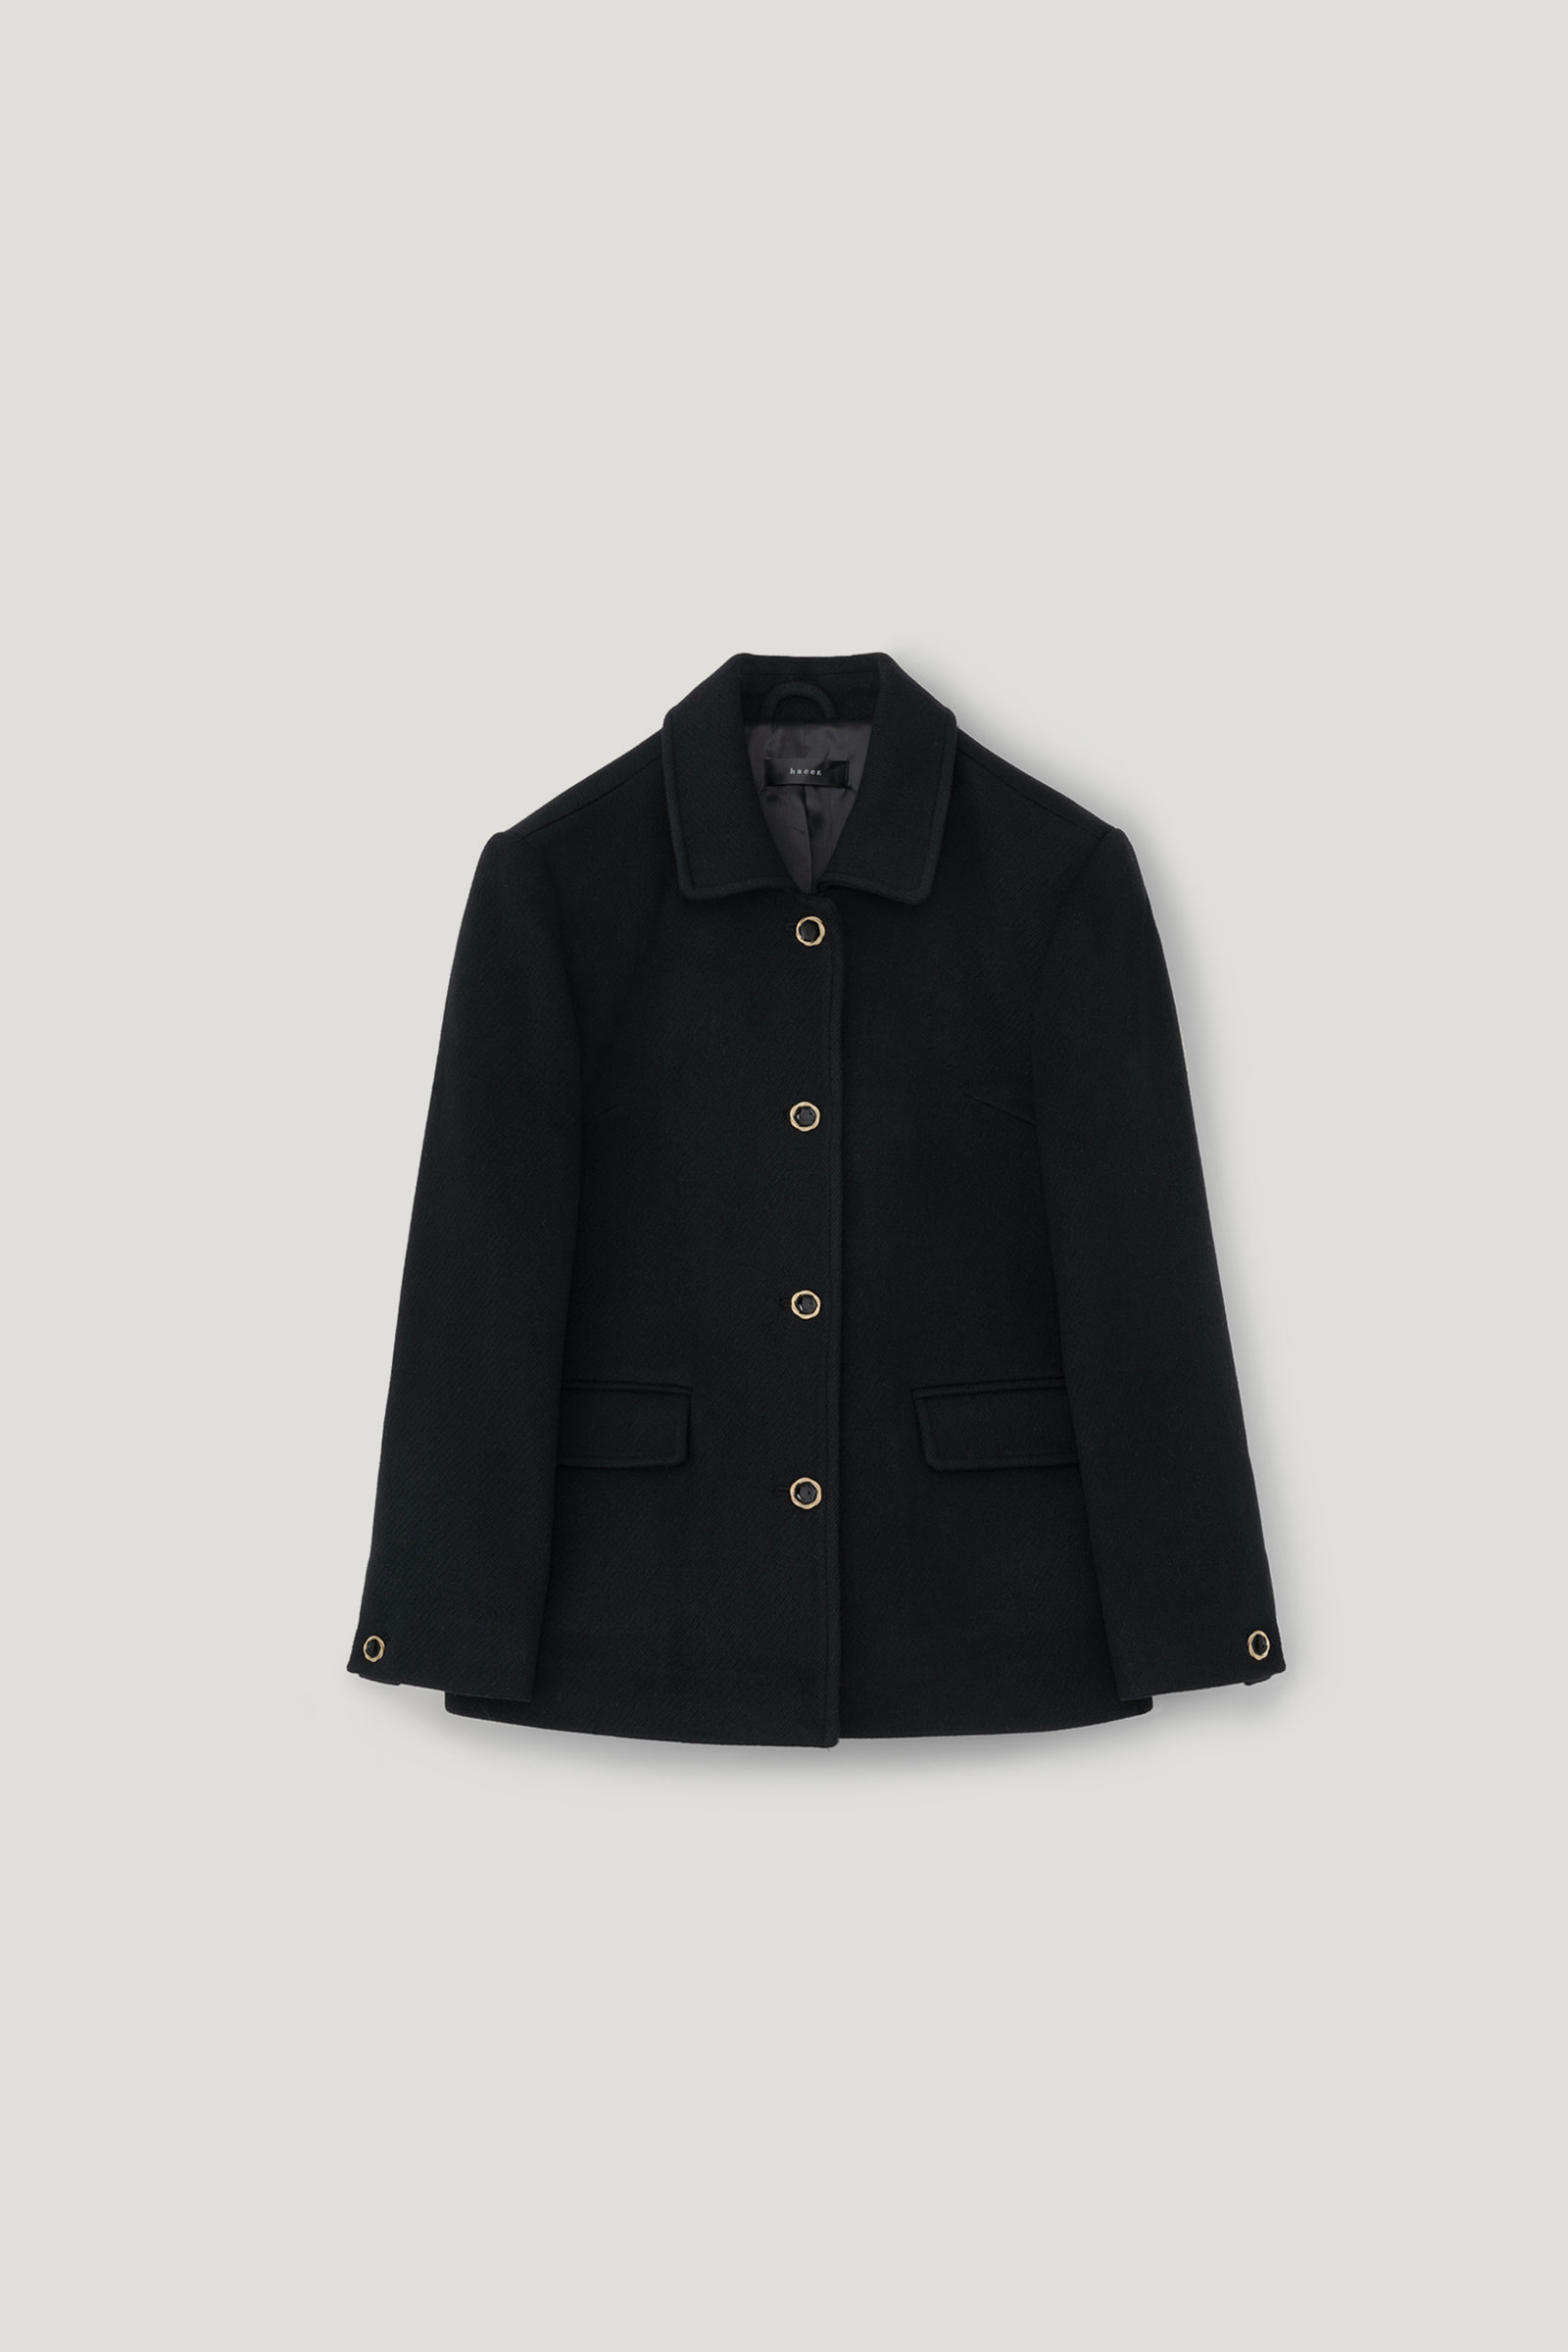 [8th] Classic 4 Button Wool Jacket